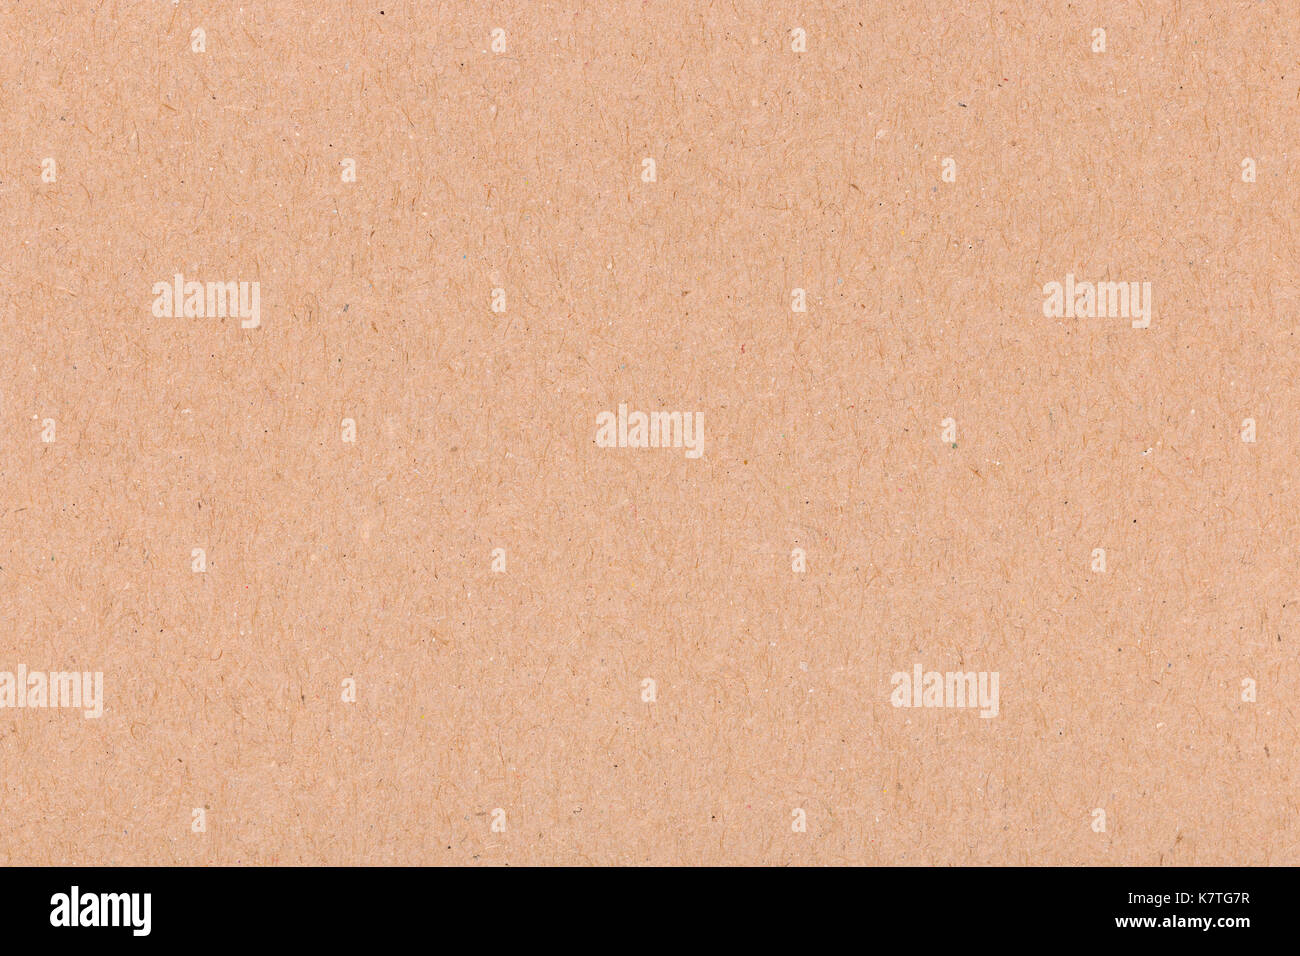 natural brown recycled paper texture background Stock Photo